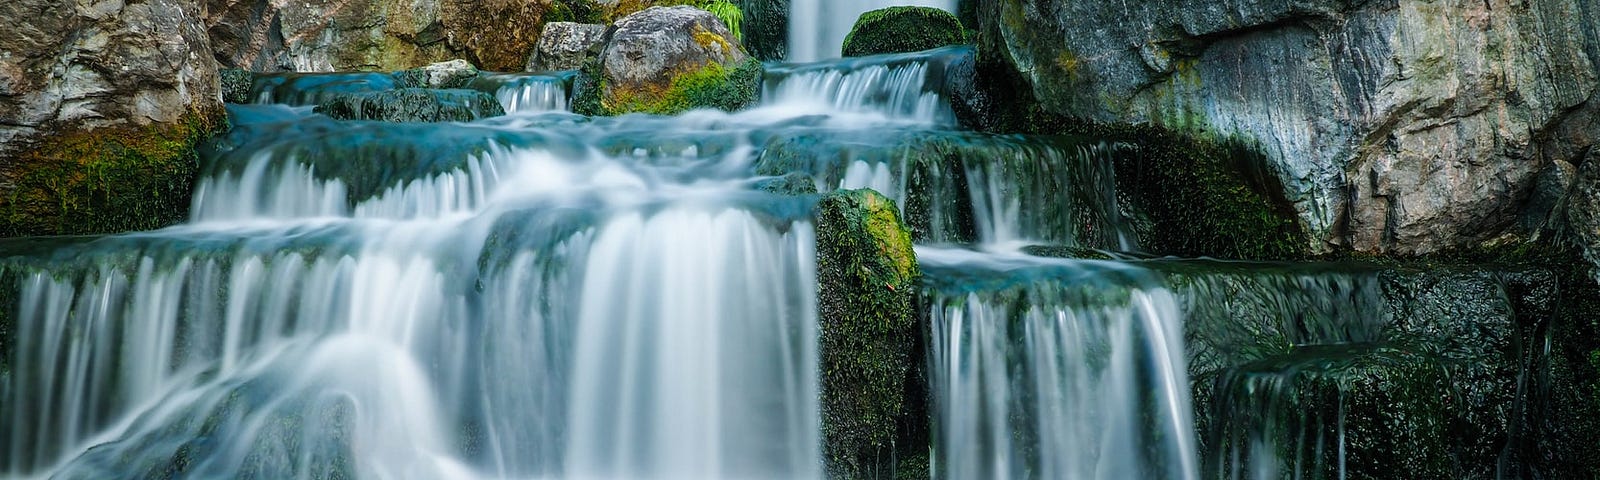 A waterfall on a small stream